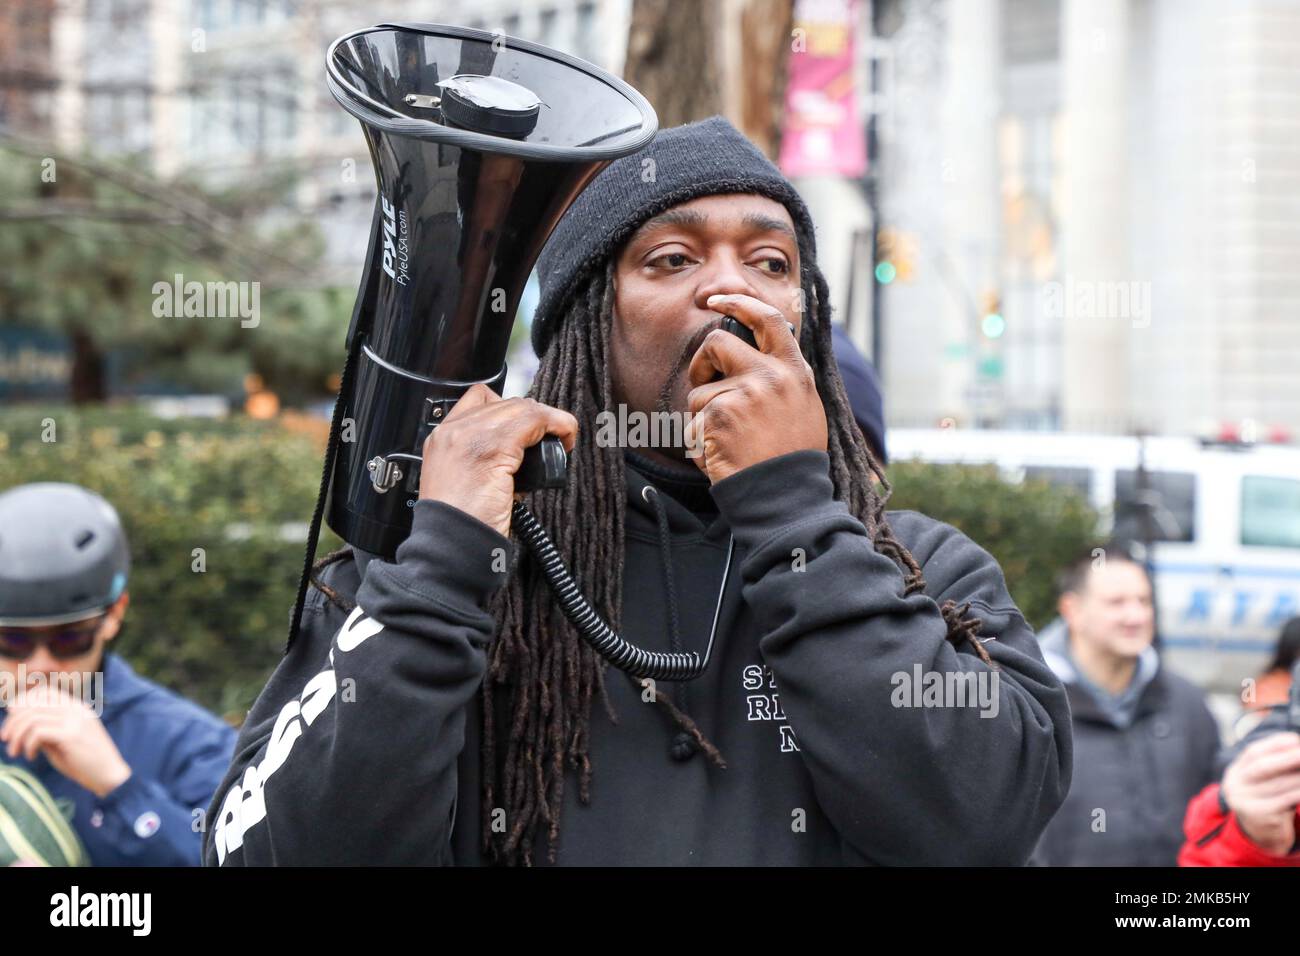 Cyclists denouncing police violence after the release of a video showing Memphis police killing Tyre Nichols. The act is part of a series of protests across the country in Union Square on the island of Manhattan in New York in the United States this Saturday, 28. Credit: Brazil Photo Press/Alamy Live News Stock Photo